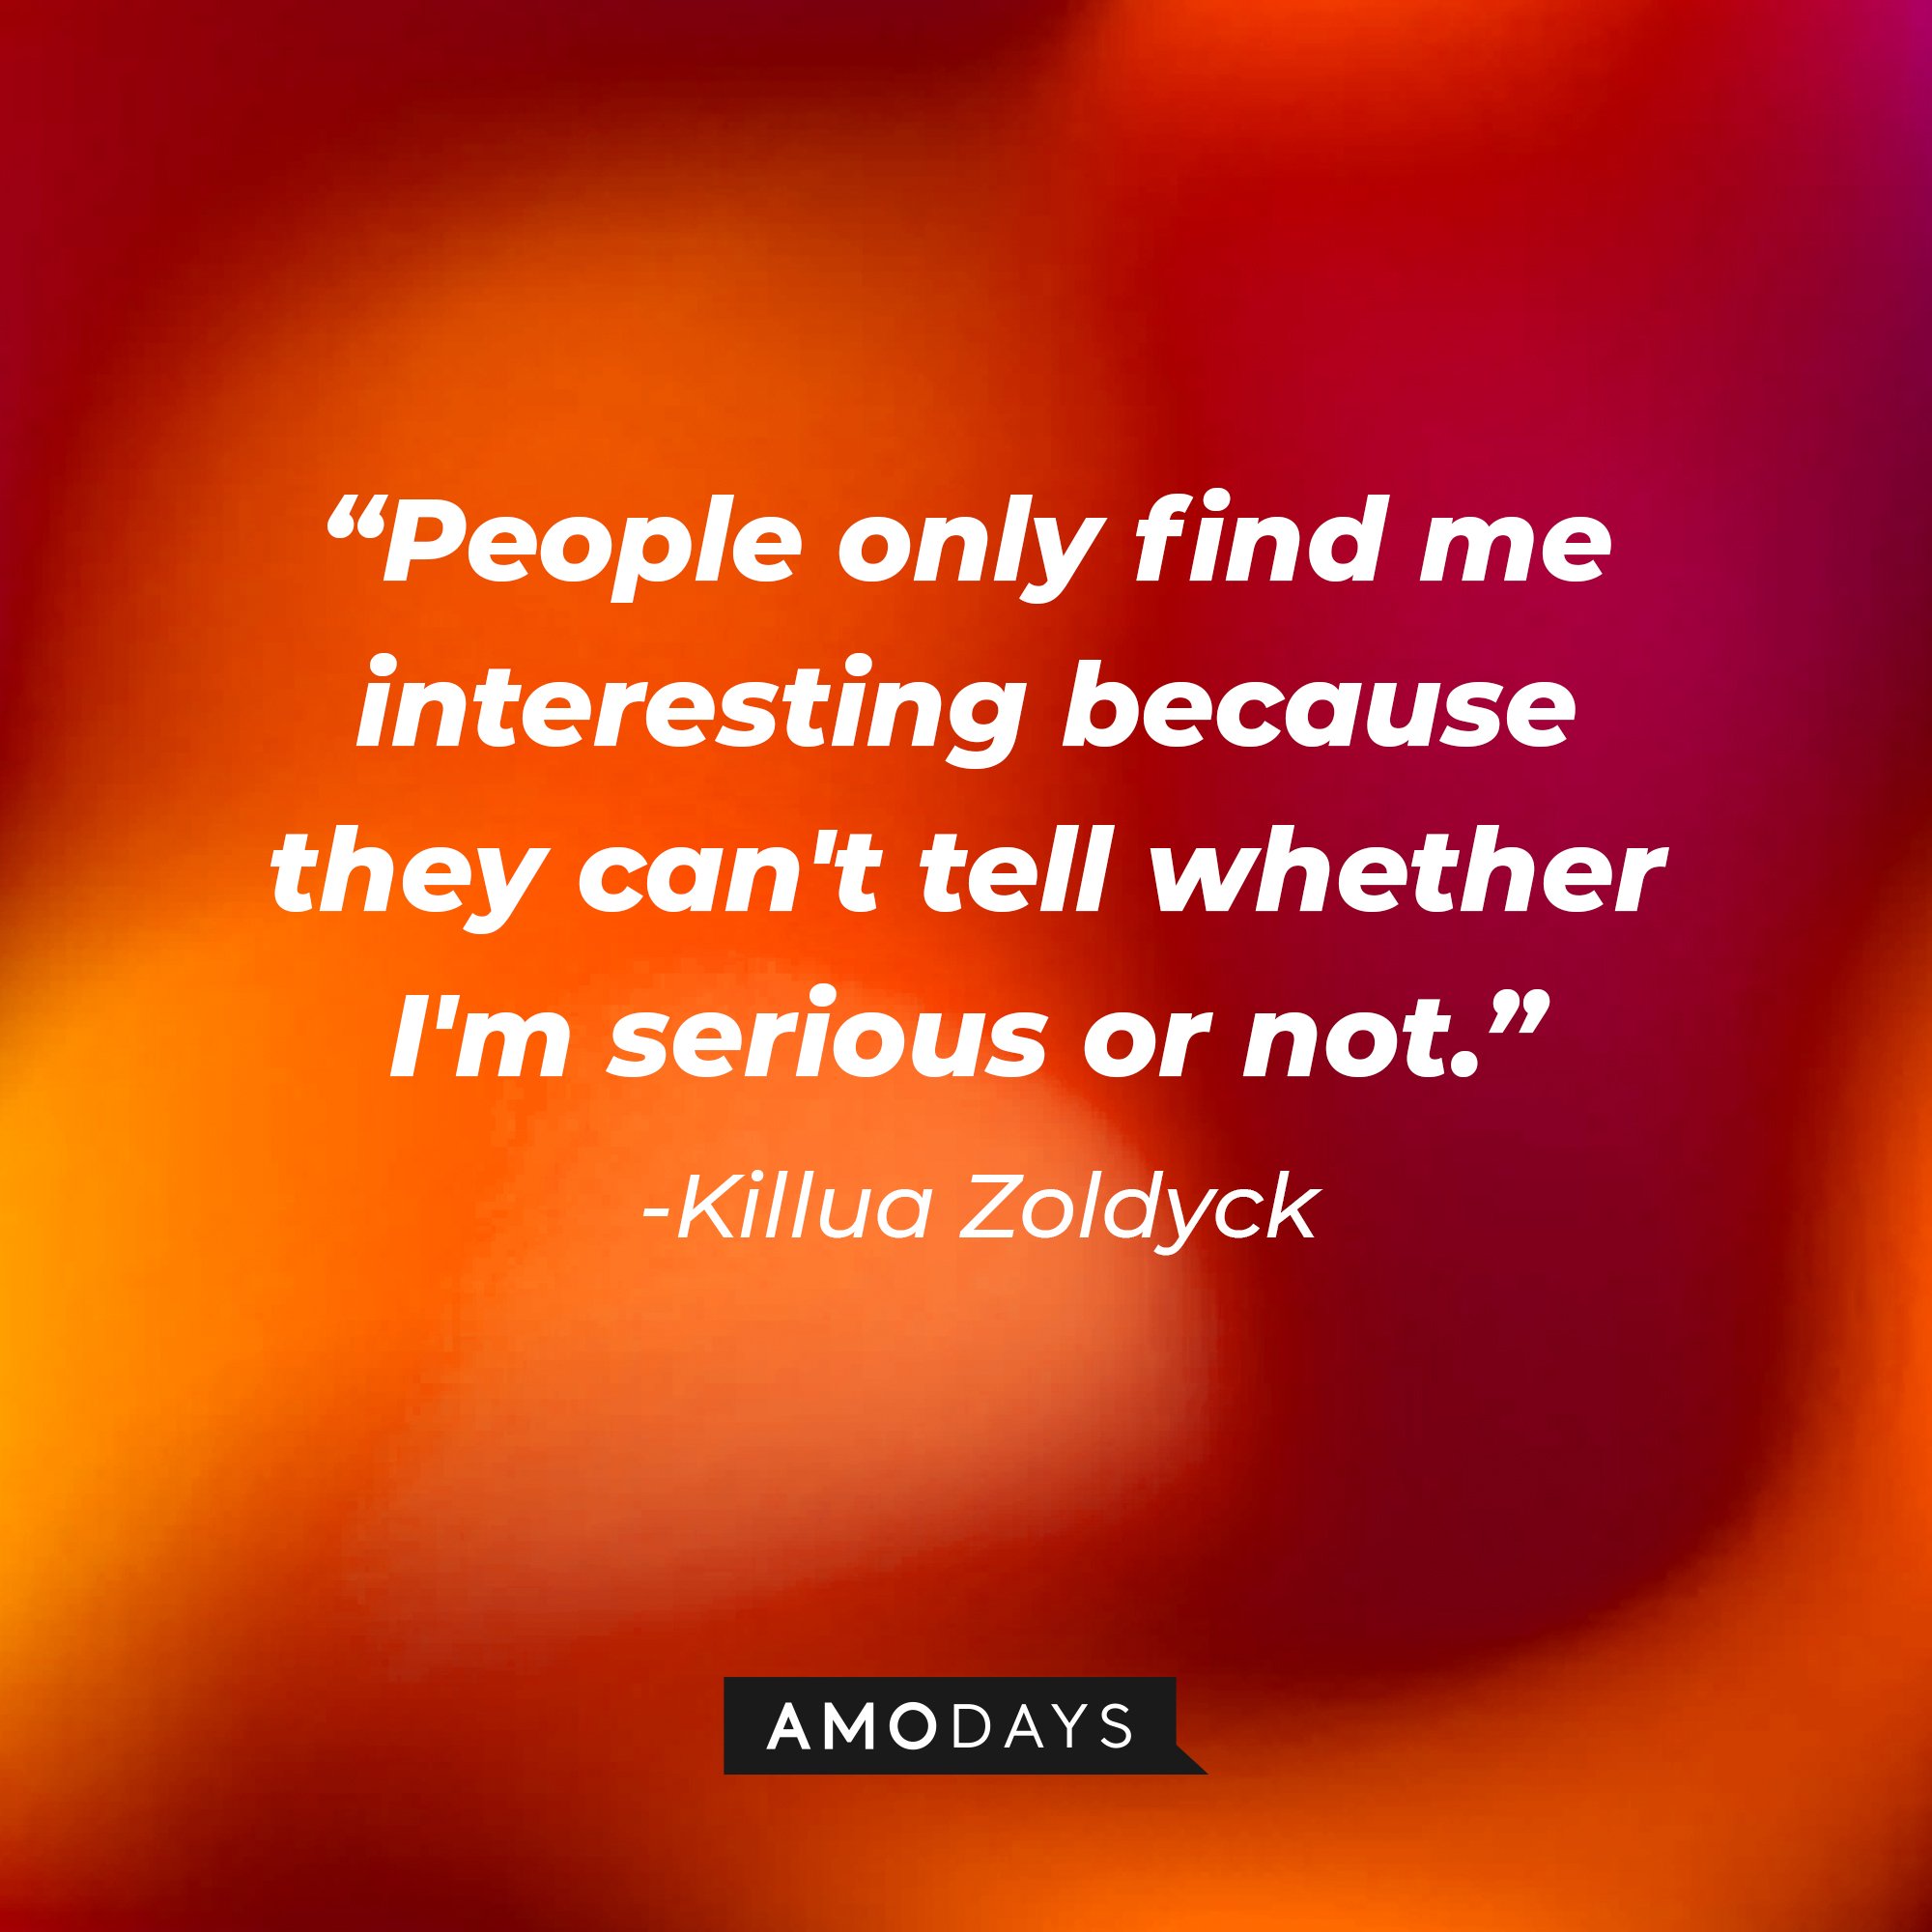 Killua Zoldyck’s quote: "People only find me interesting because they can't tell whether I'm serious or not." | Image: AmoDays 